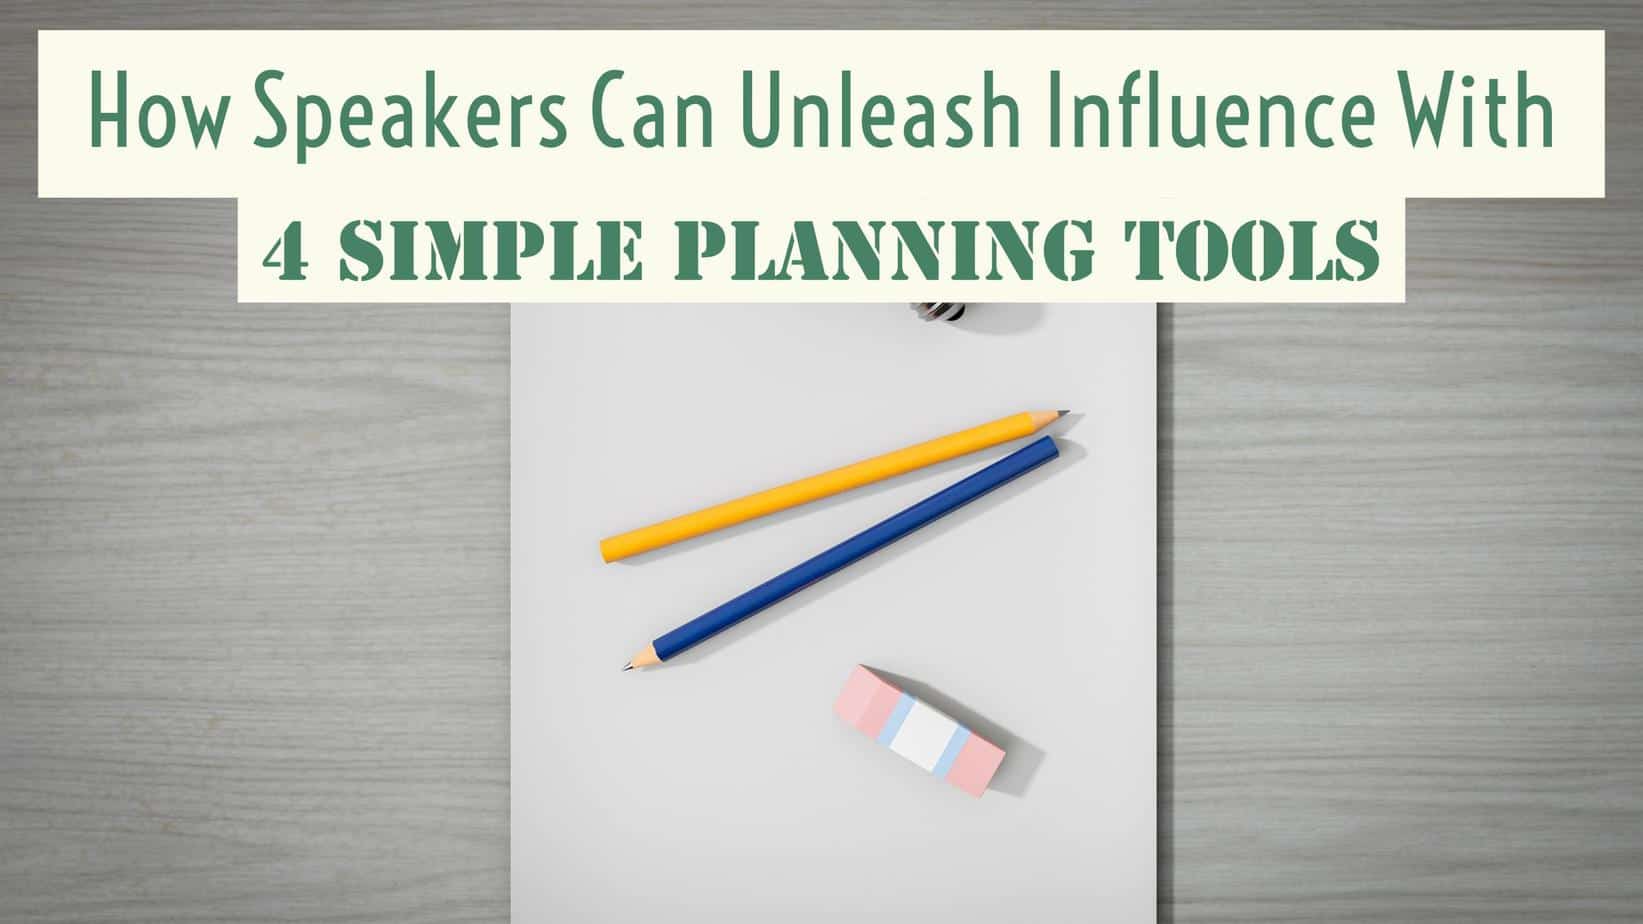 How Speakers Can Unleash Influence with 4 Simple Planning Tools